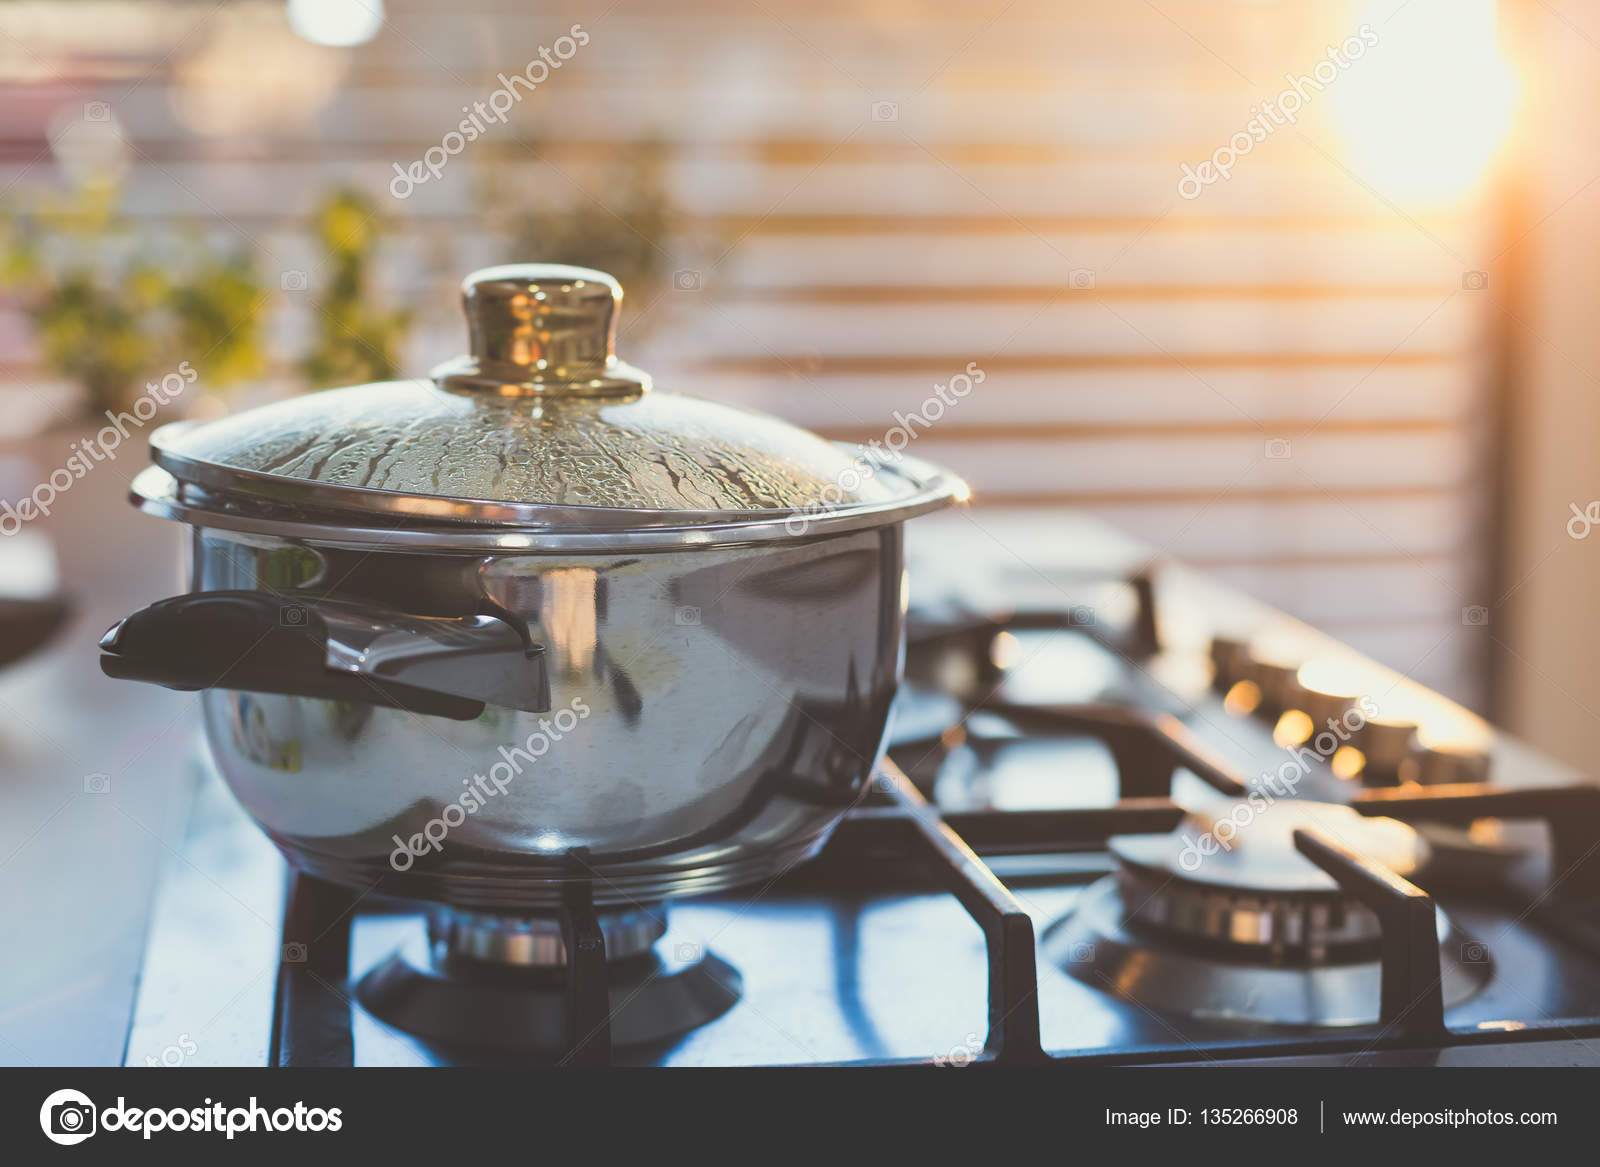 Cooking pot on the stove Stock Photo by ©eskaylim 118705498